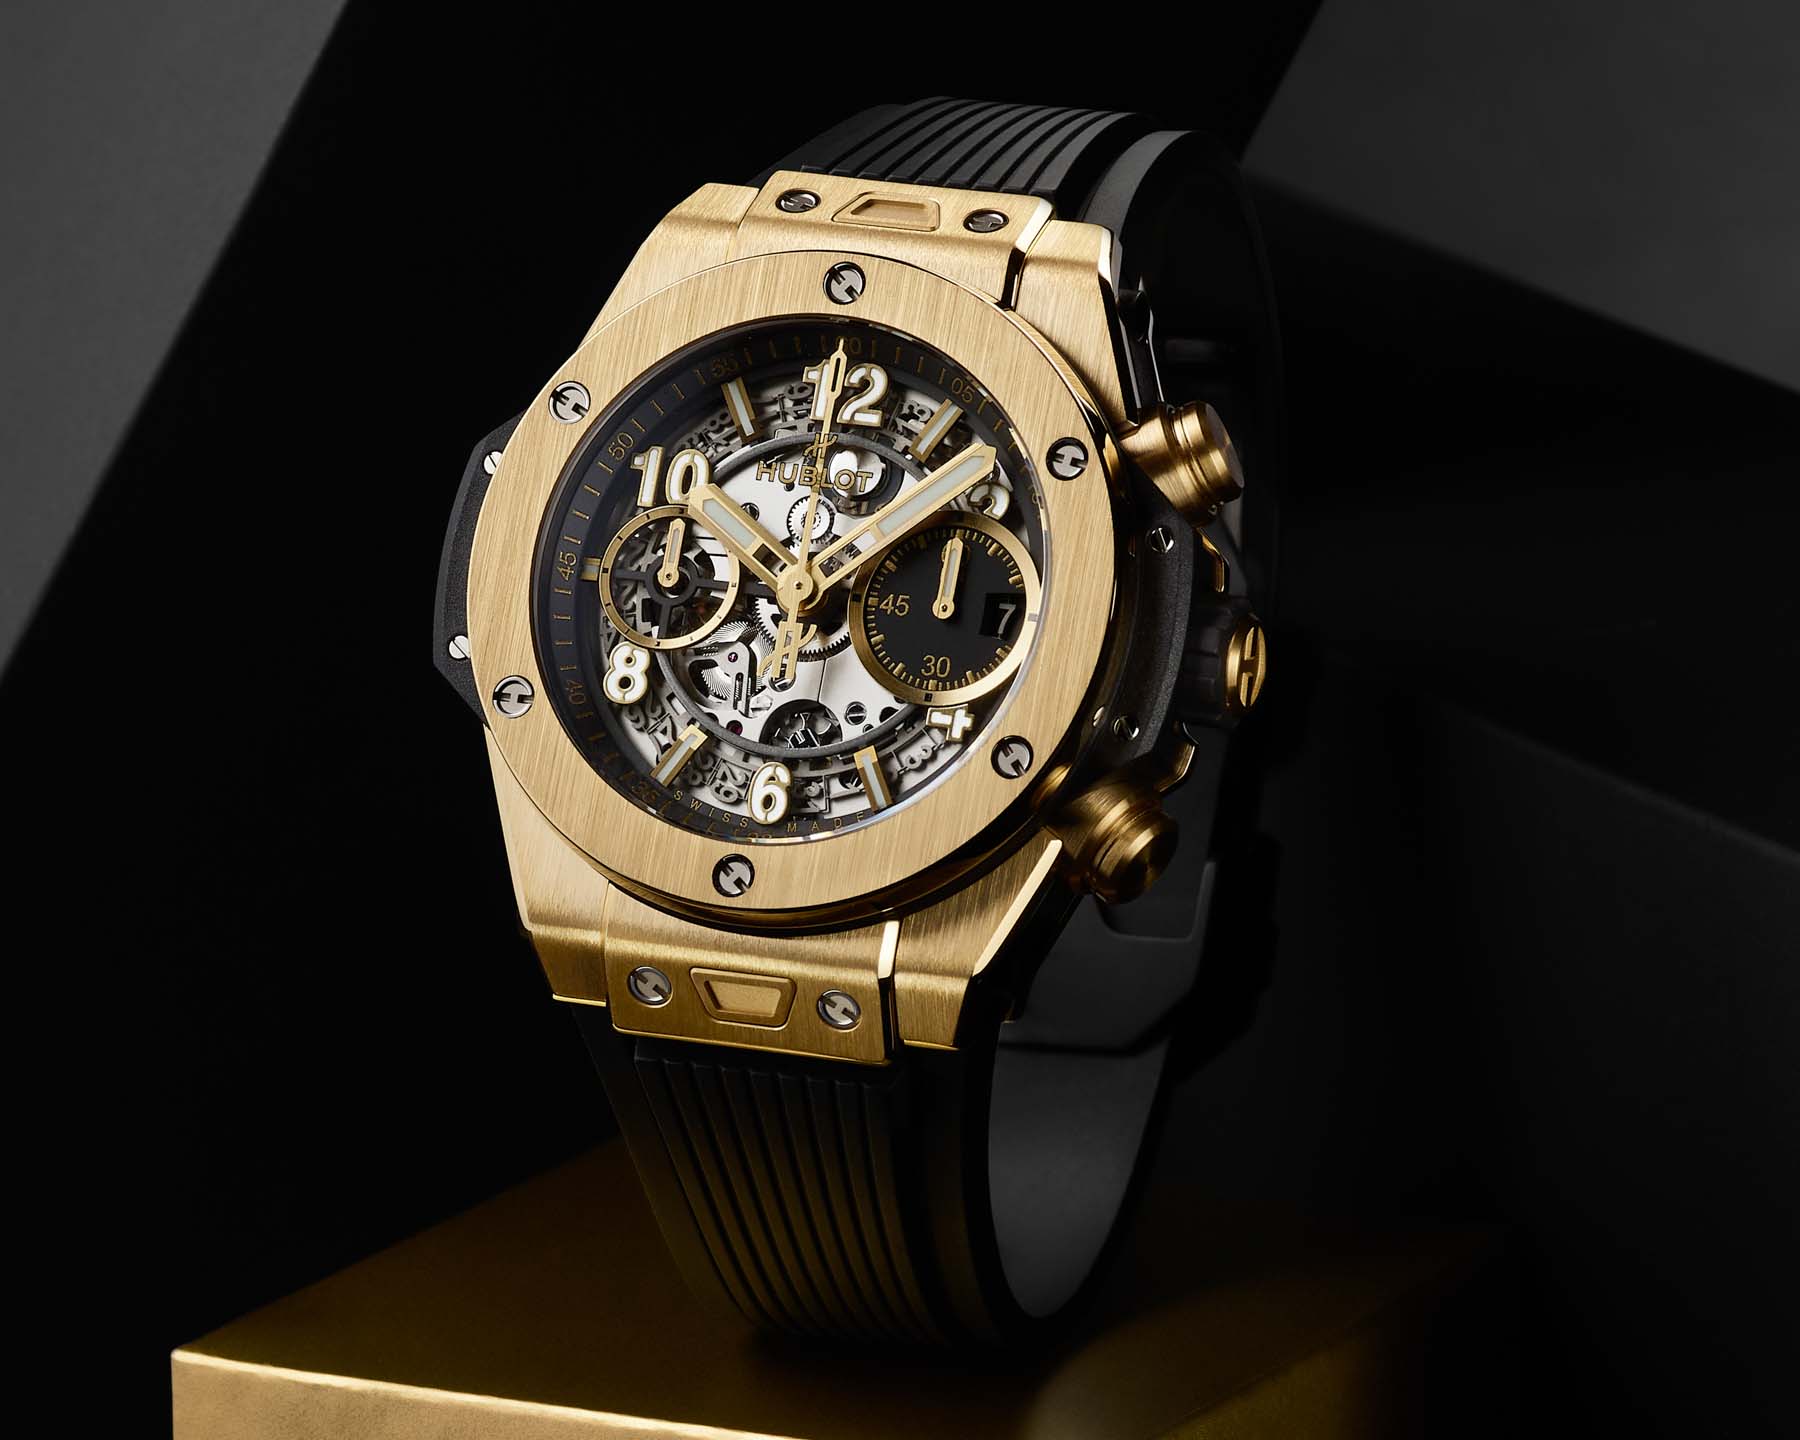 Hublot Gold Watch - 25 For Sale on 1stDibs  2000, gold hublot watch price,  hublot 18k gold watch